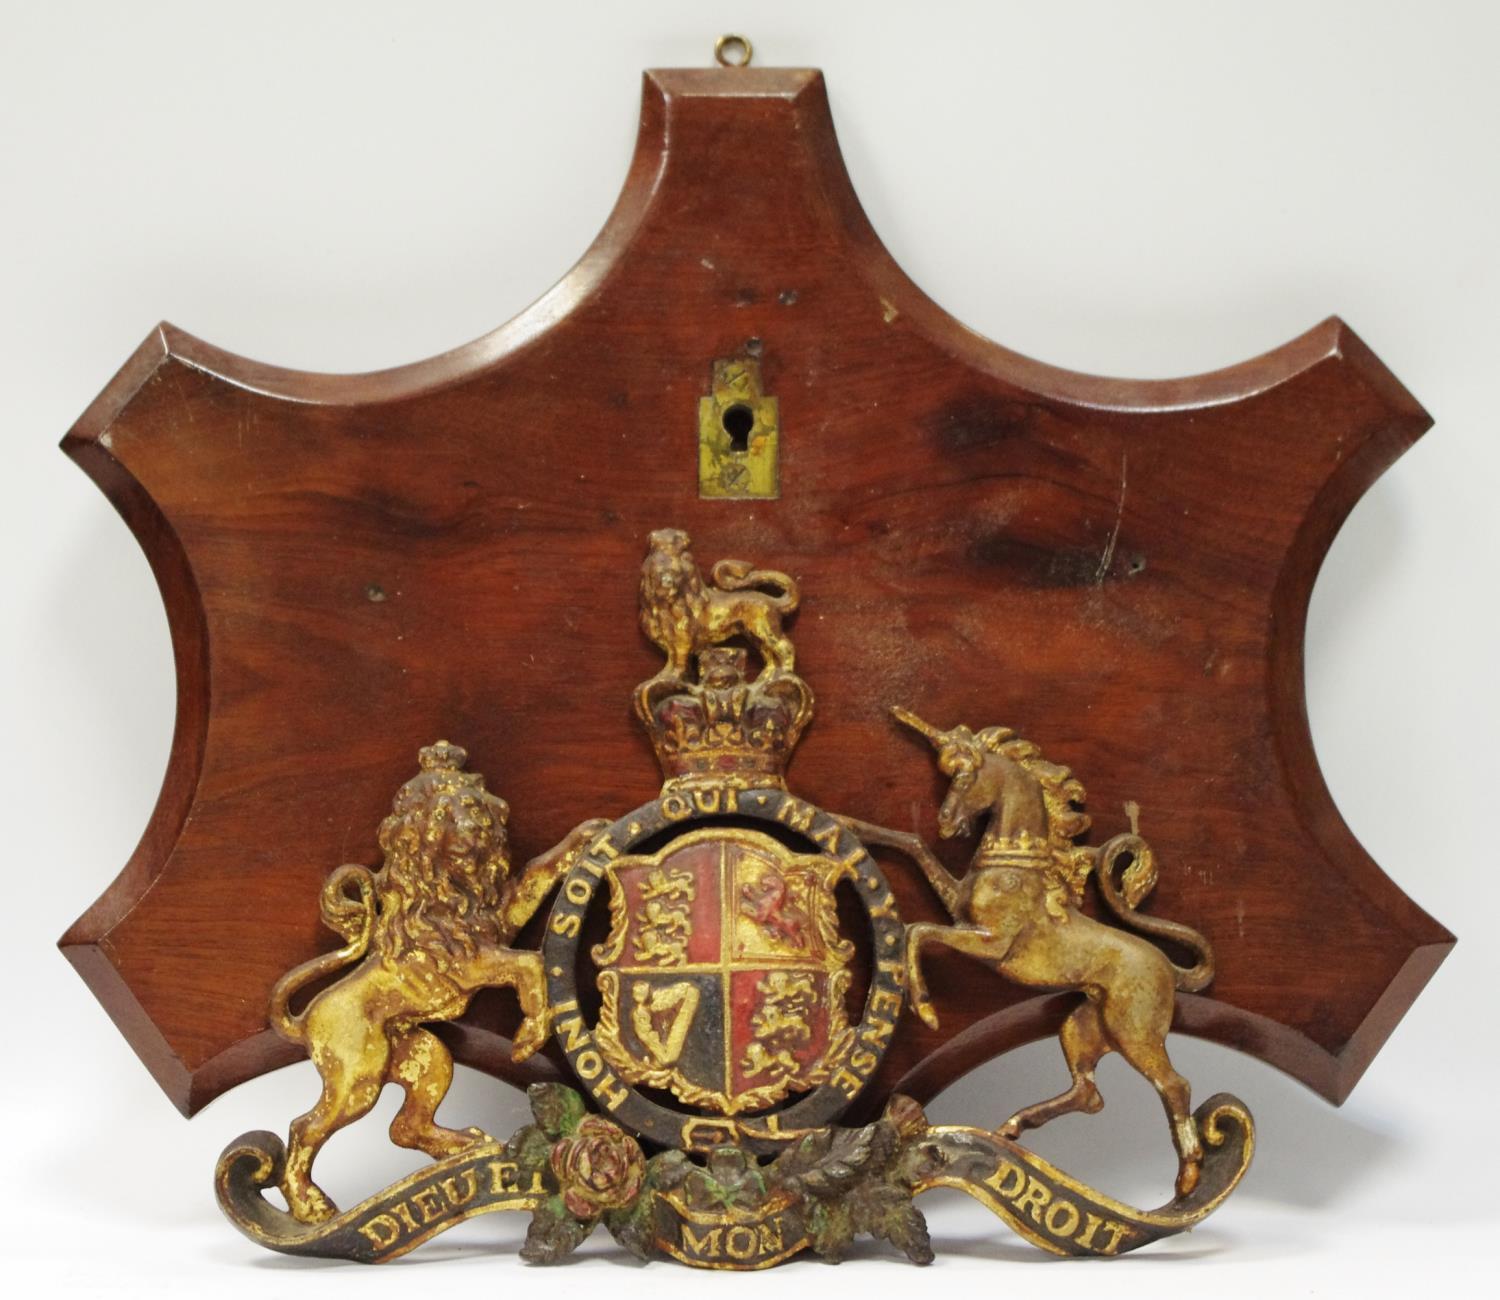 A cast Royal coat of Arms armorial on mahogany plaque